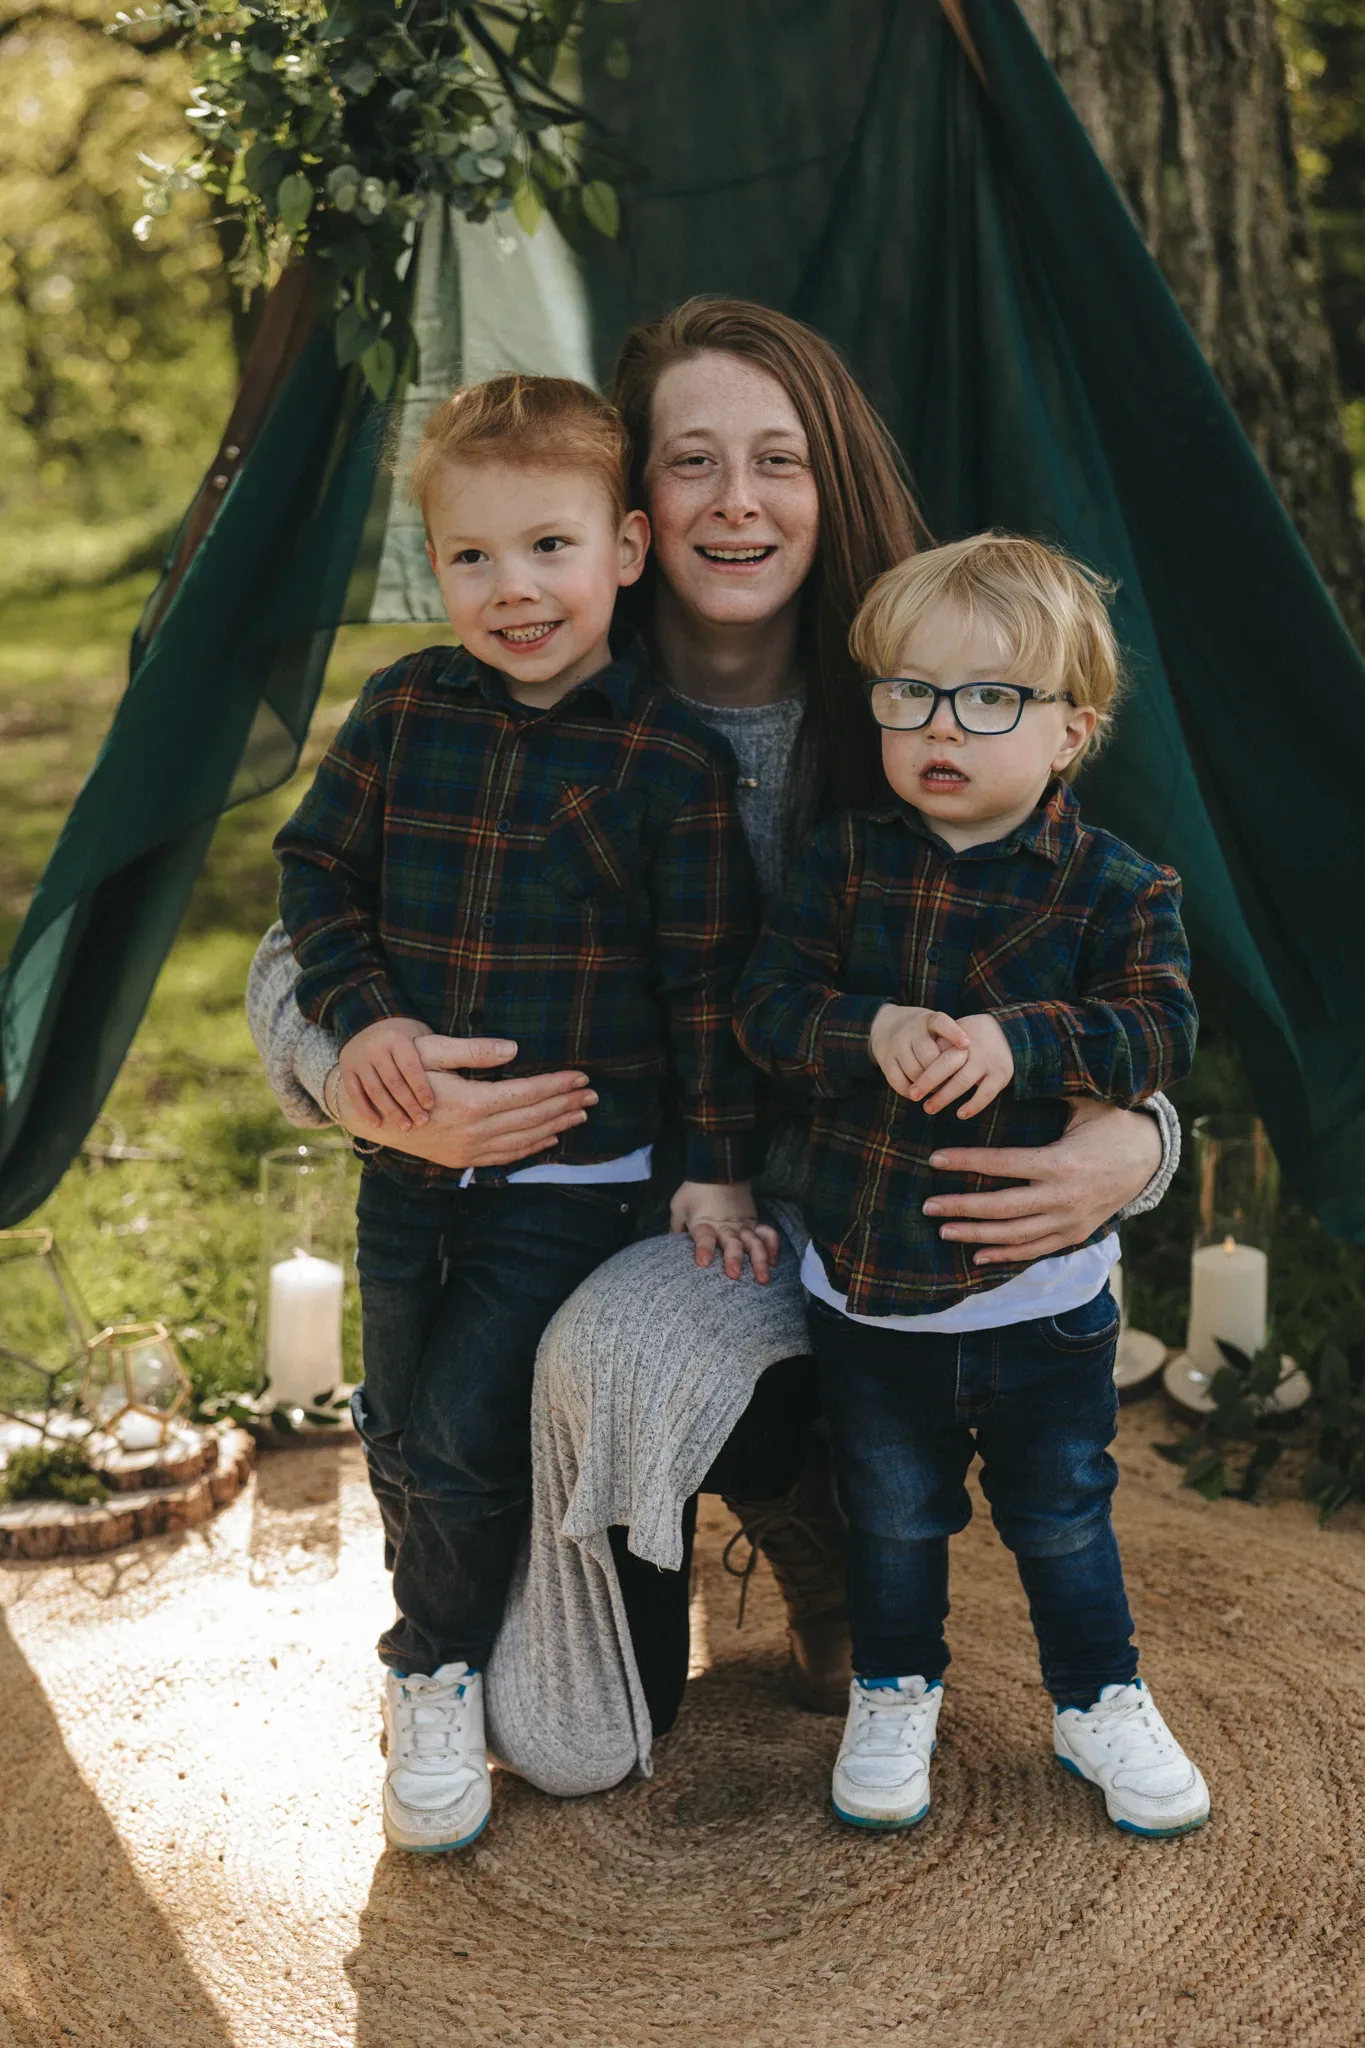 A mother sits with her two young sons under a green tent outdoors, smiling. they all wear matching plaid shirts and jeans. the setting includes a circular rug and decorative candles, creating a cozy, woodland ambiance.